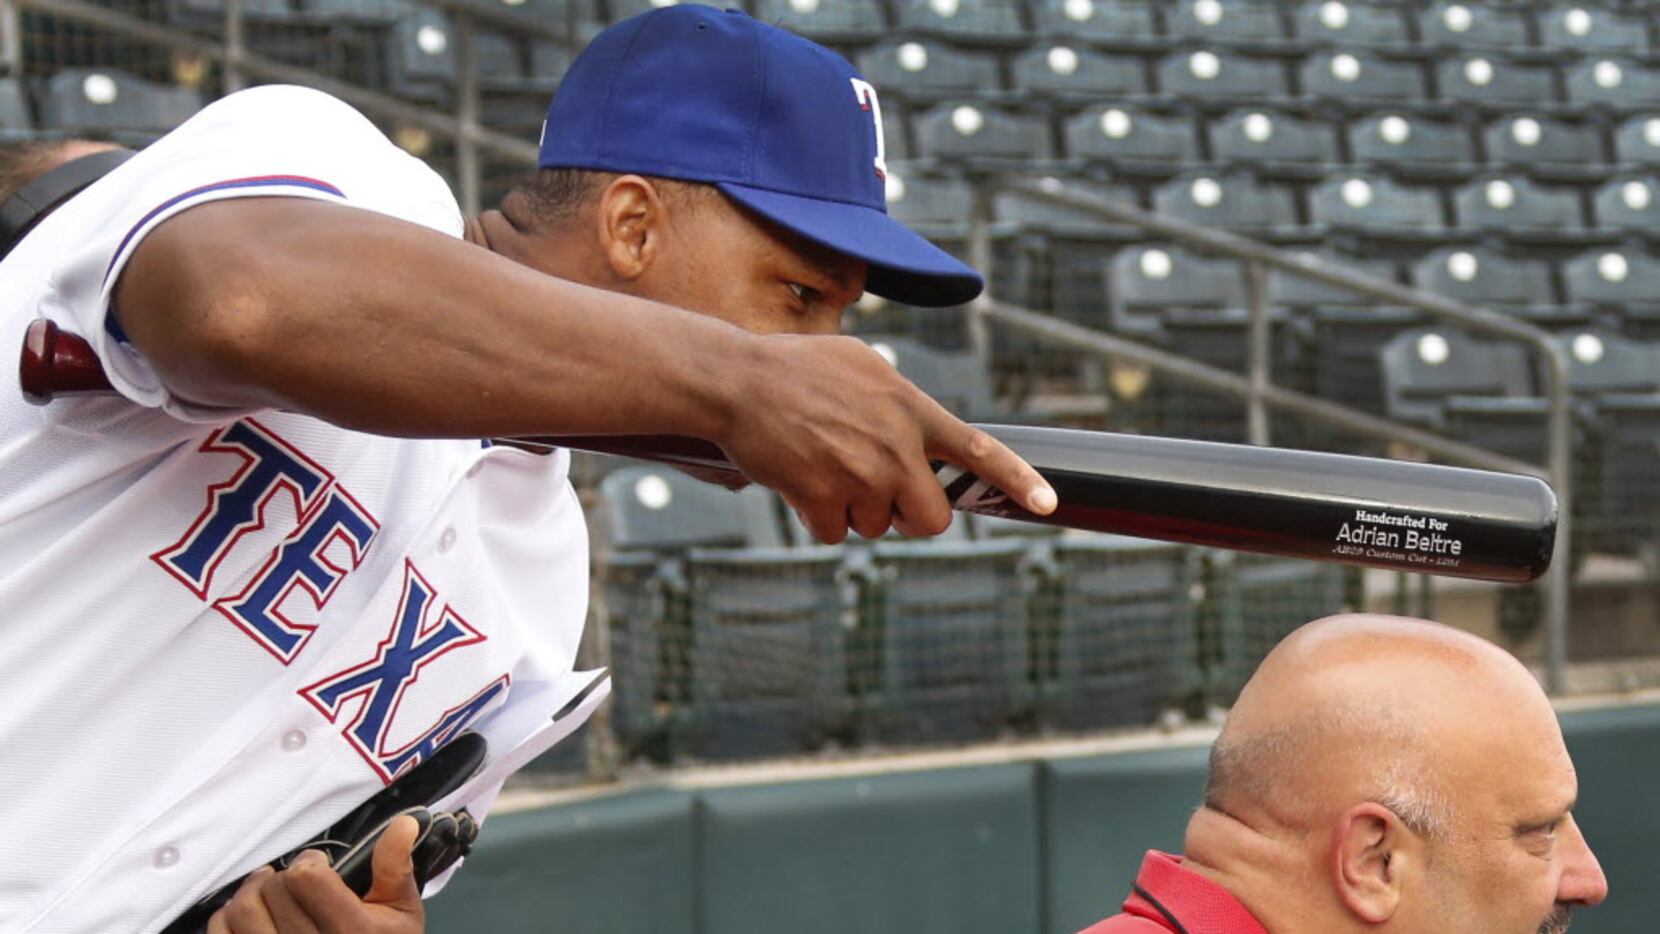 Let's talk about Adrian Beltre (and his head) 